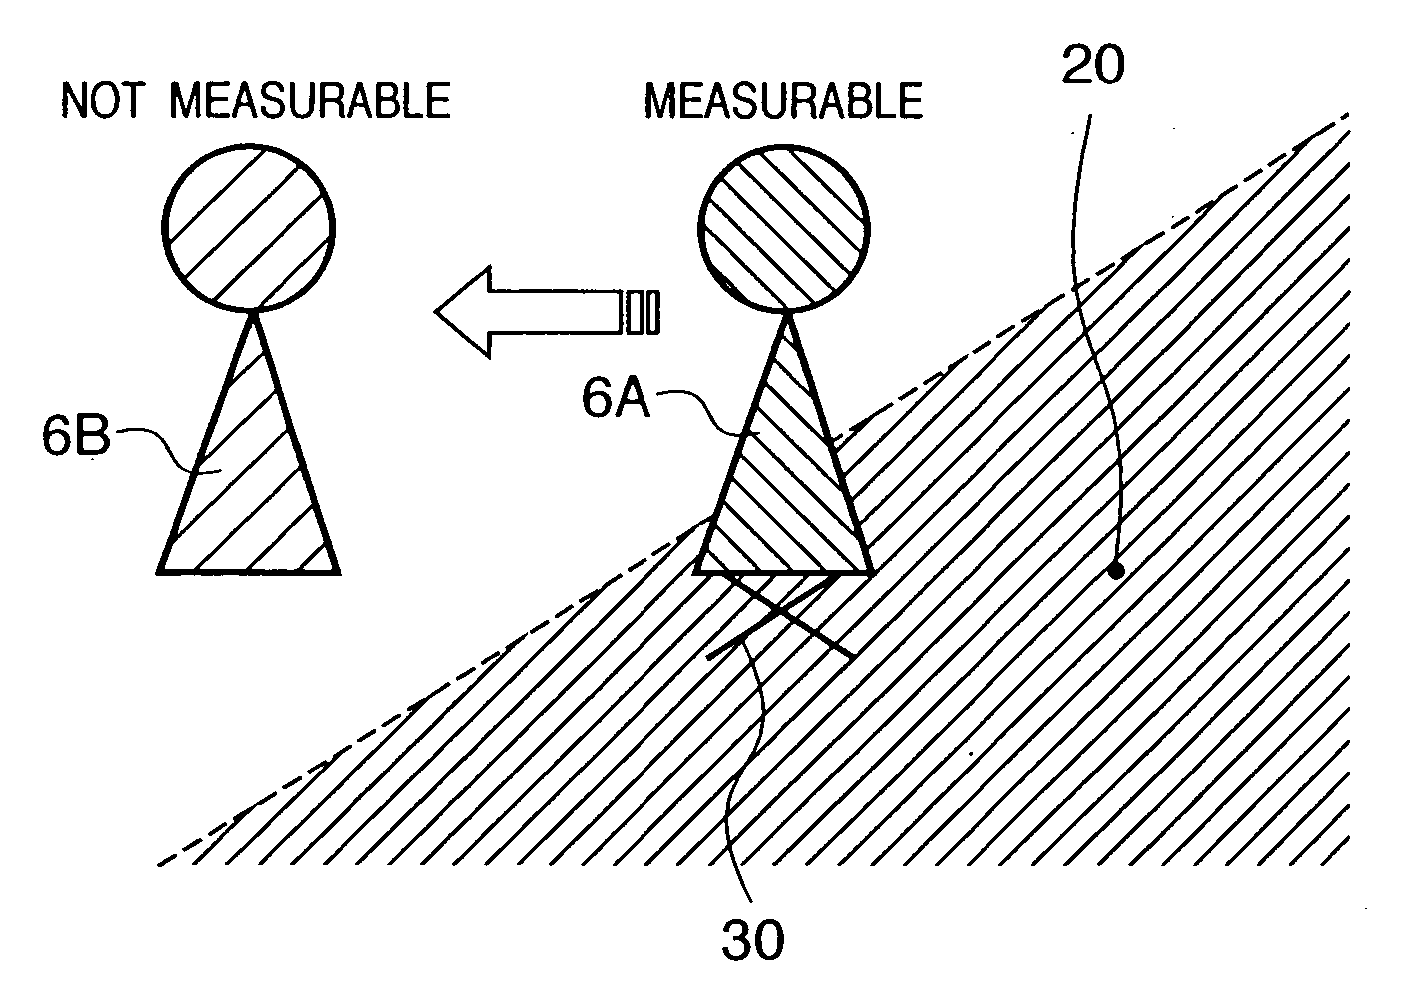 Mixed reality exhibiting method and apparatus